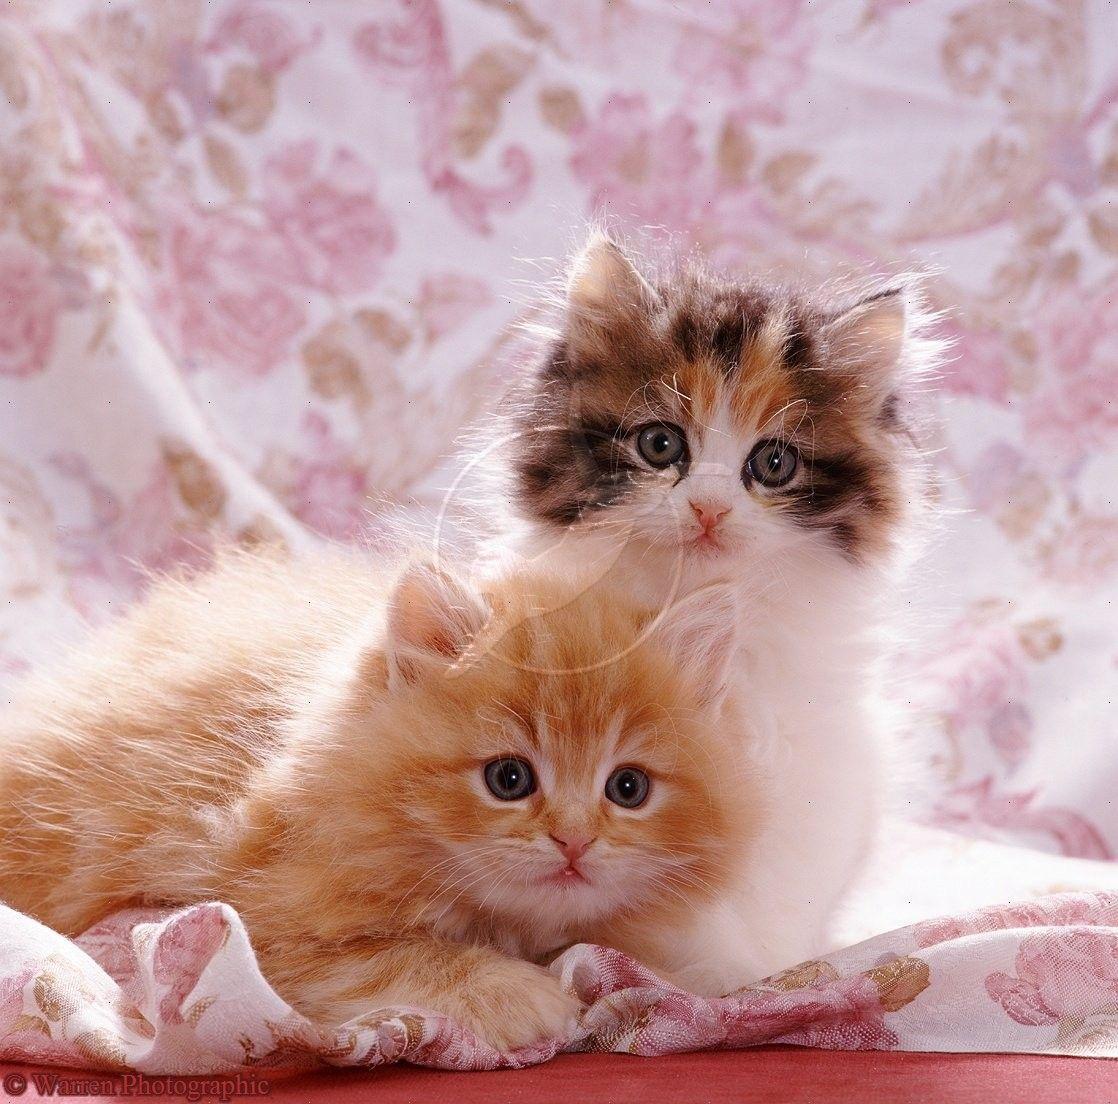 Cats Kitties Kittens Cute Fringed Adorable Sweet Cover Lovely